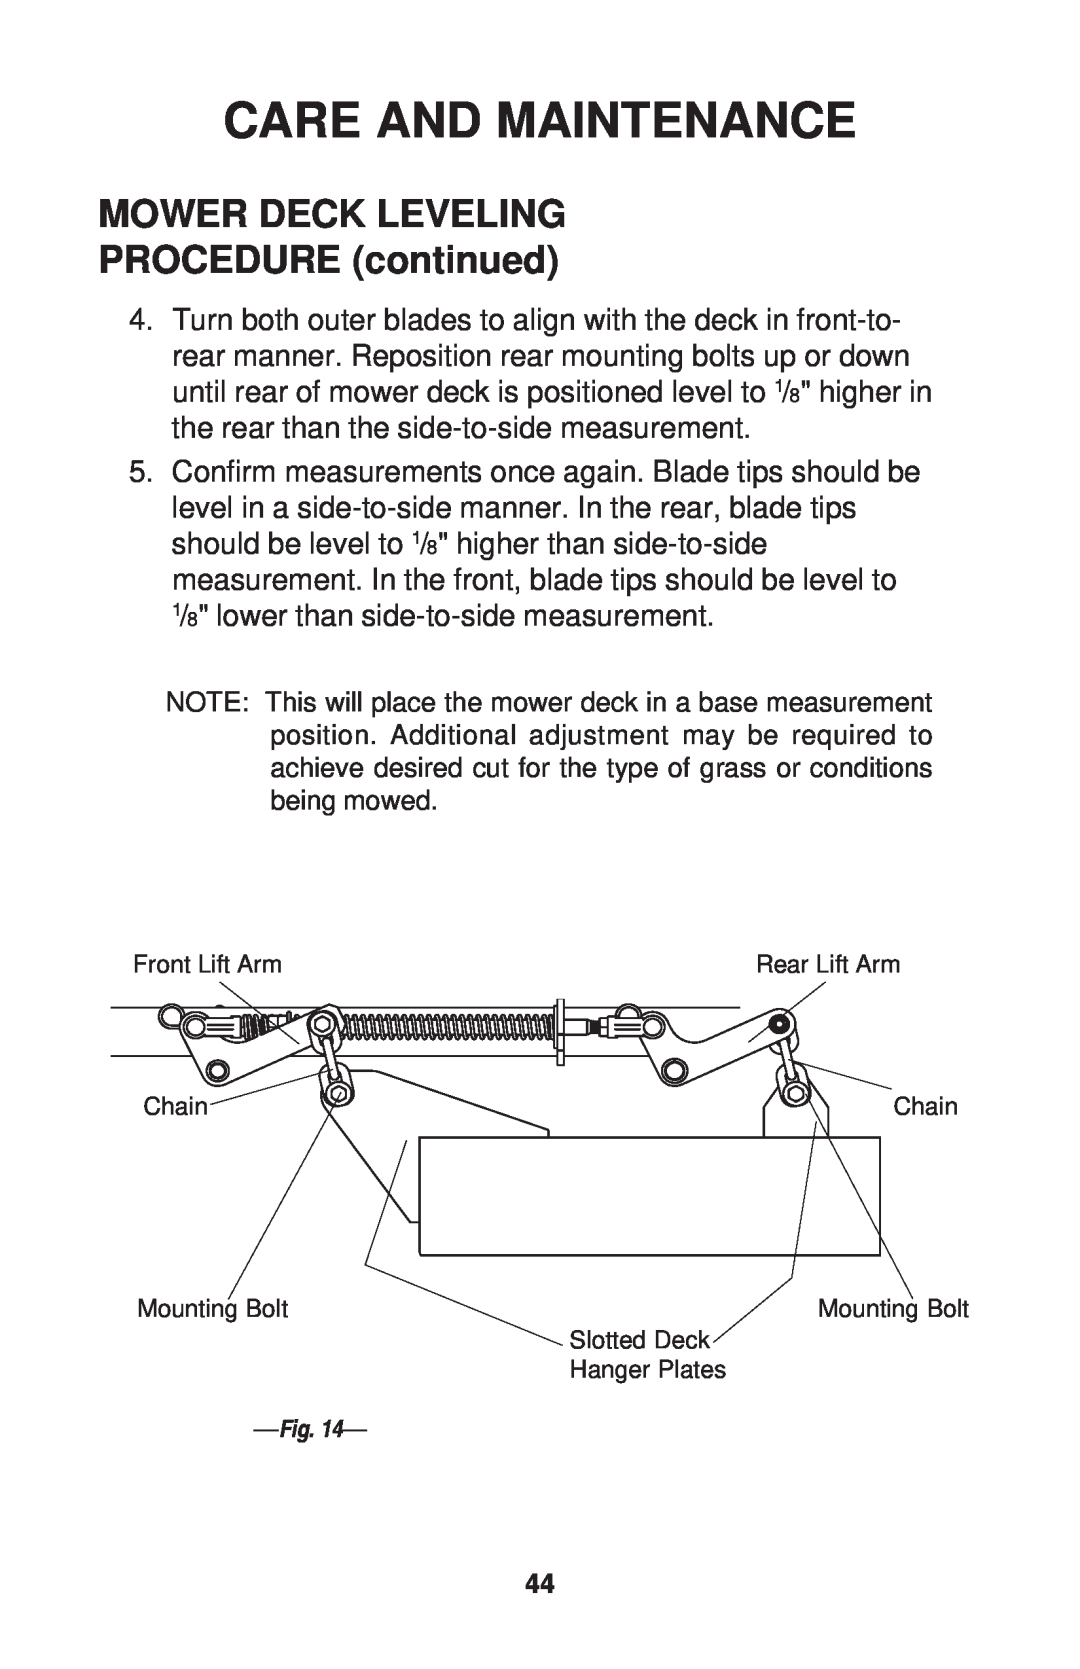 Dixon ZTR 34, ZTR 44, ZTR 34 manual MOWER DECK LEVELING PROCEDURE continued, Care And Maintenance, Chain 